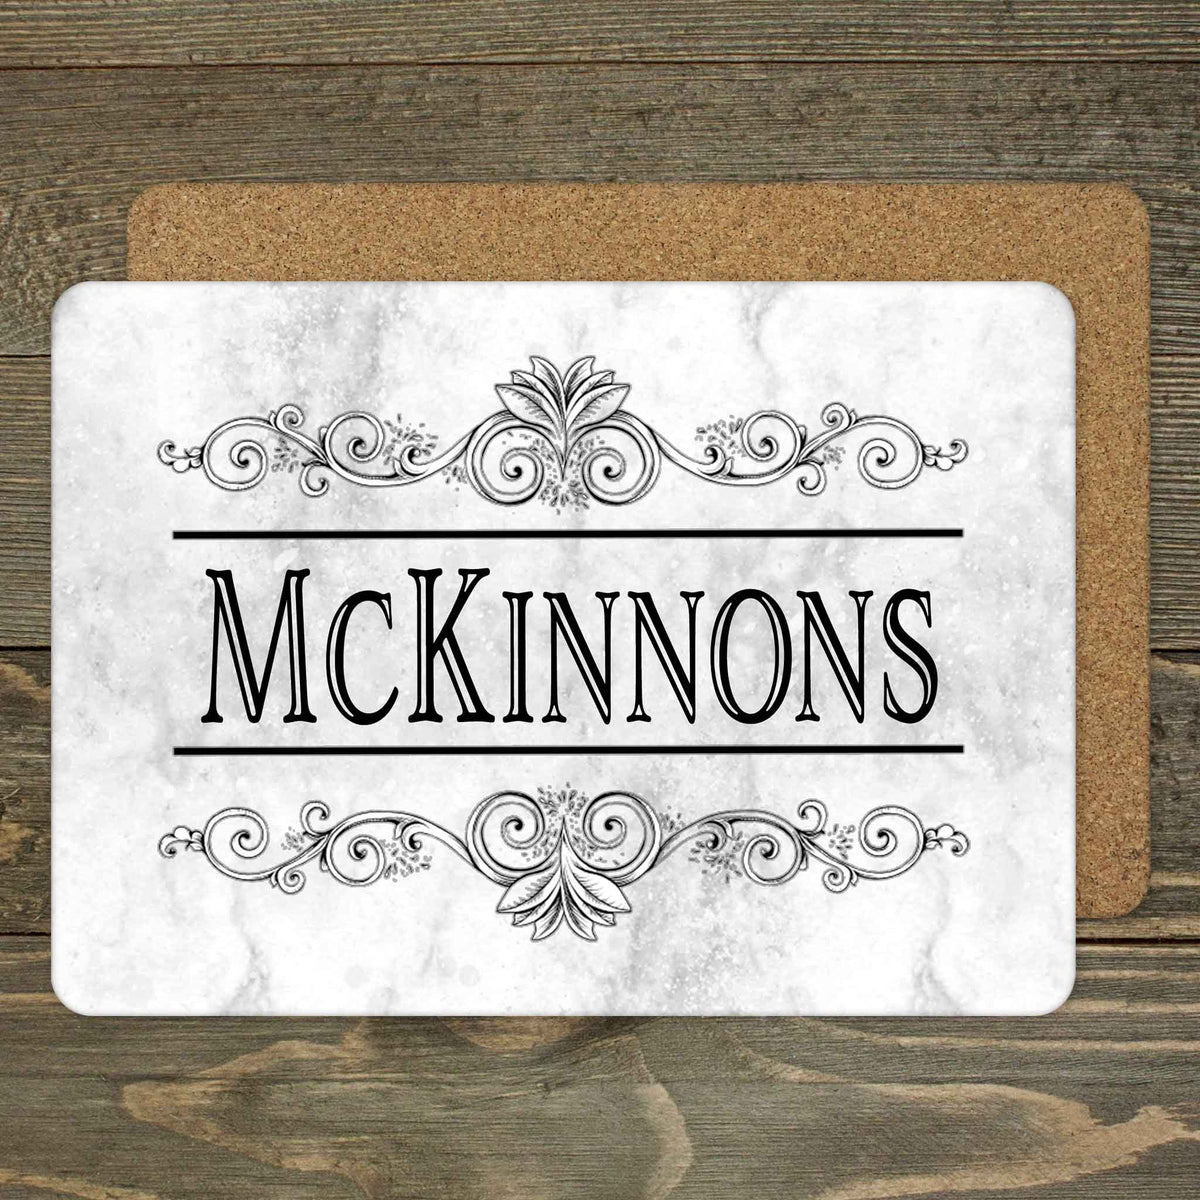 Custom Placemats | Personalized Dining and Serving | Decorative Vine